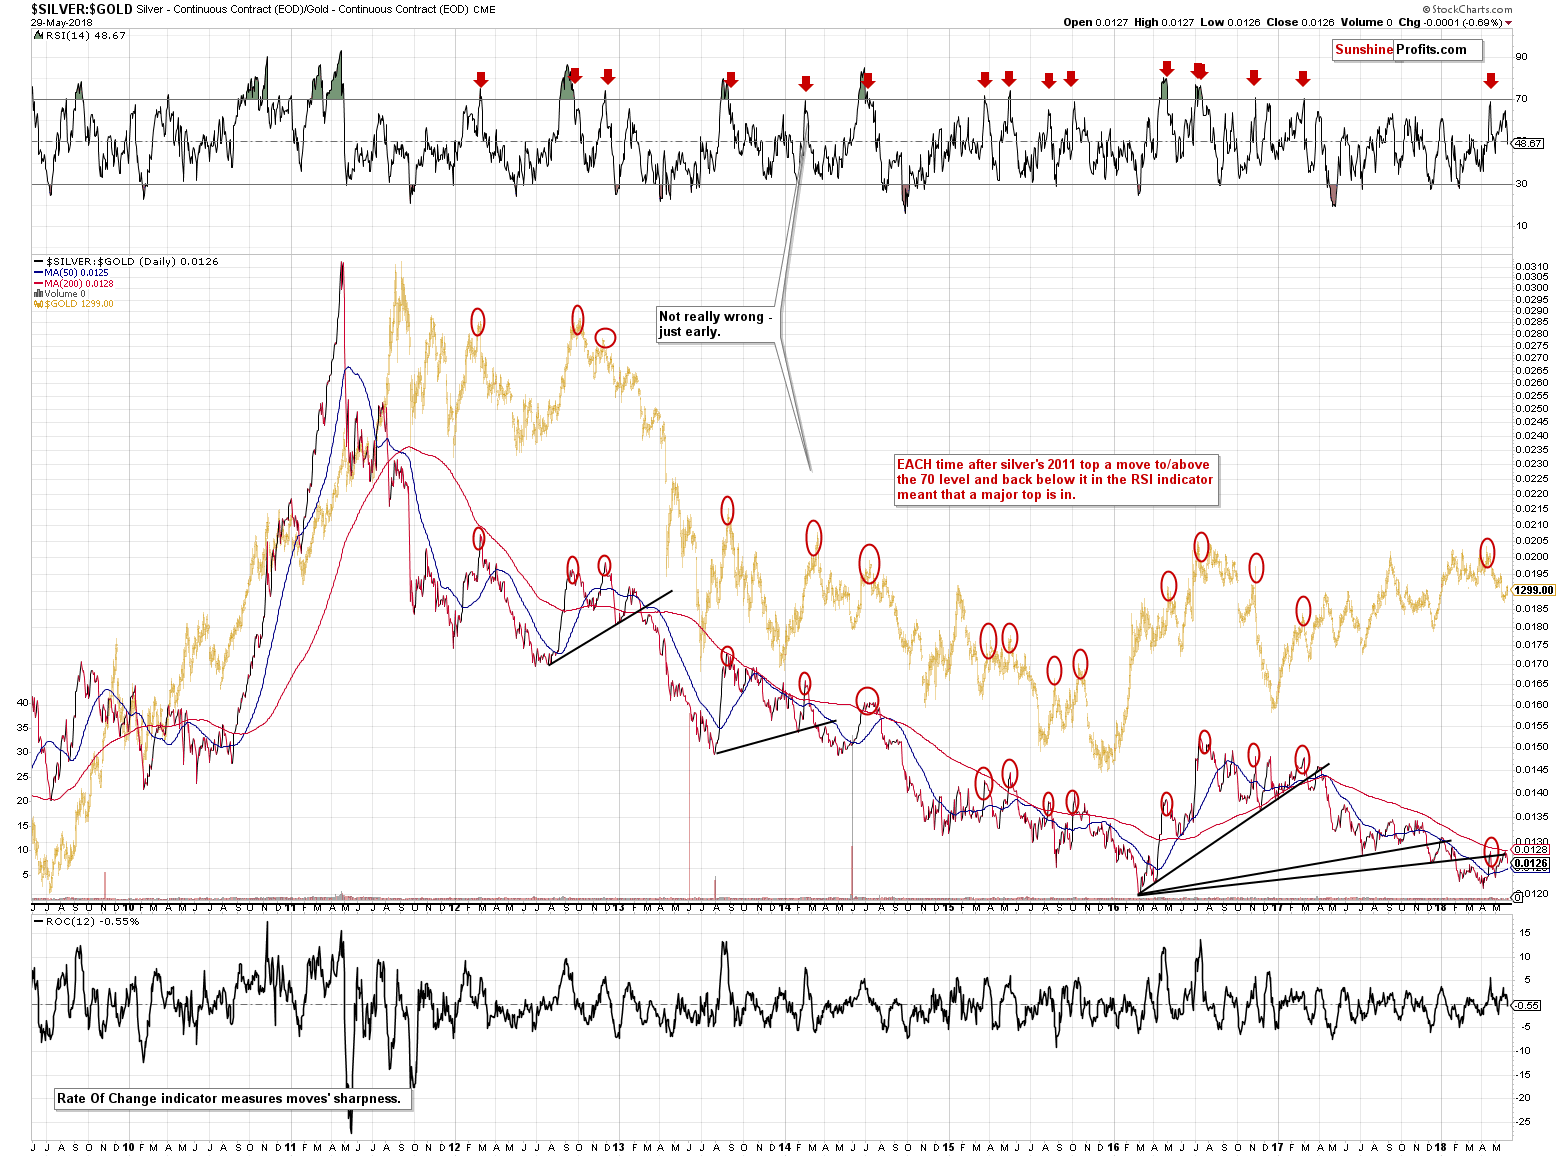 SILVER:GOLD - Silver to gold ratio chart